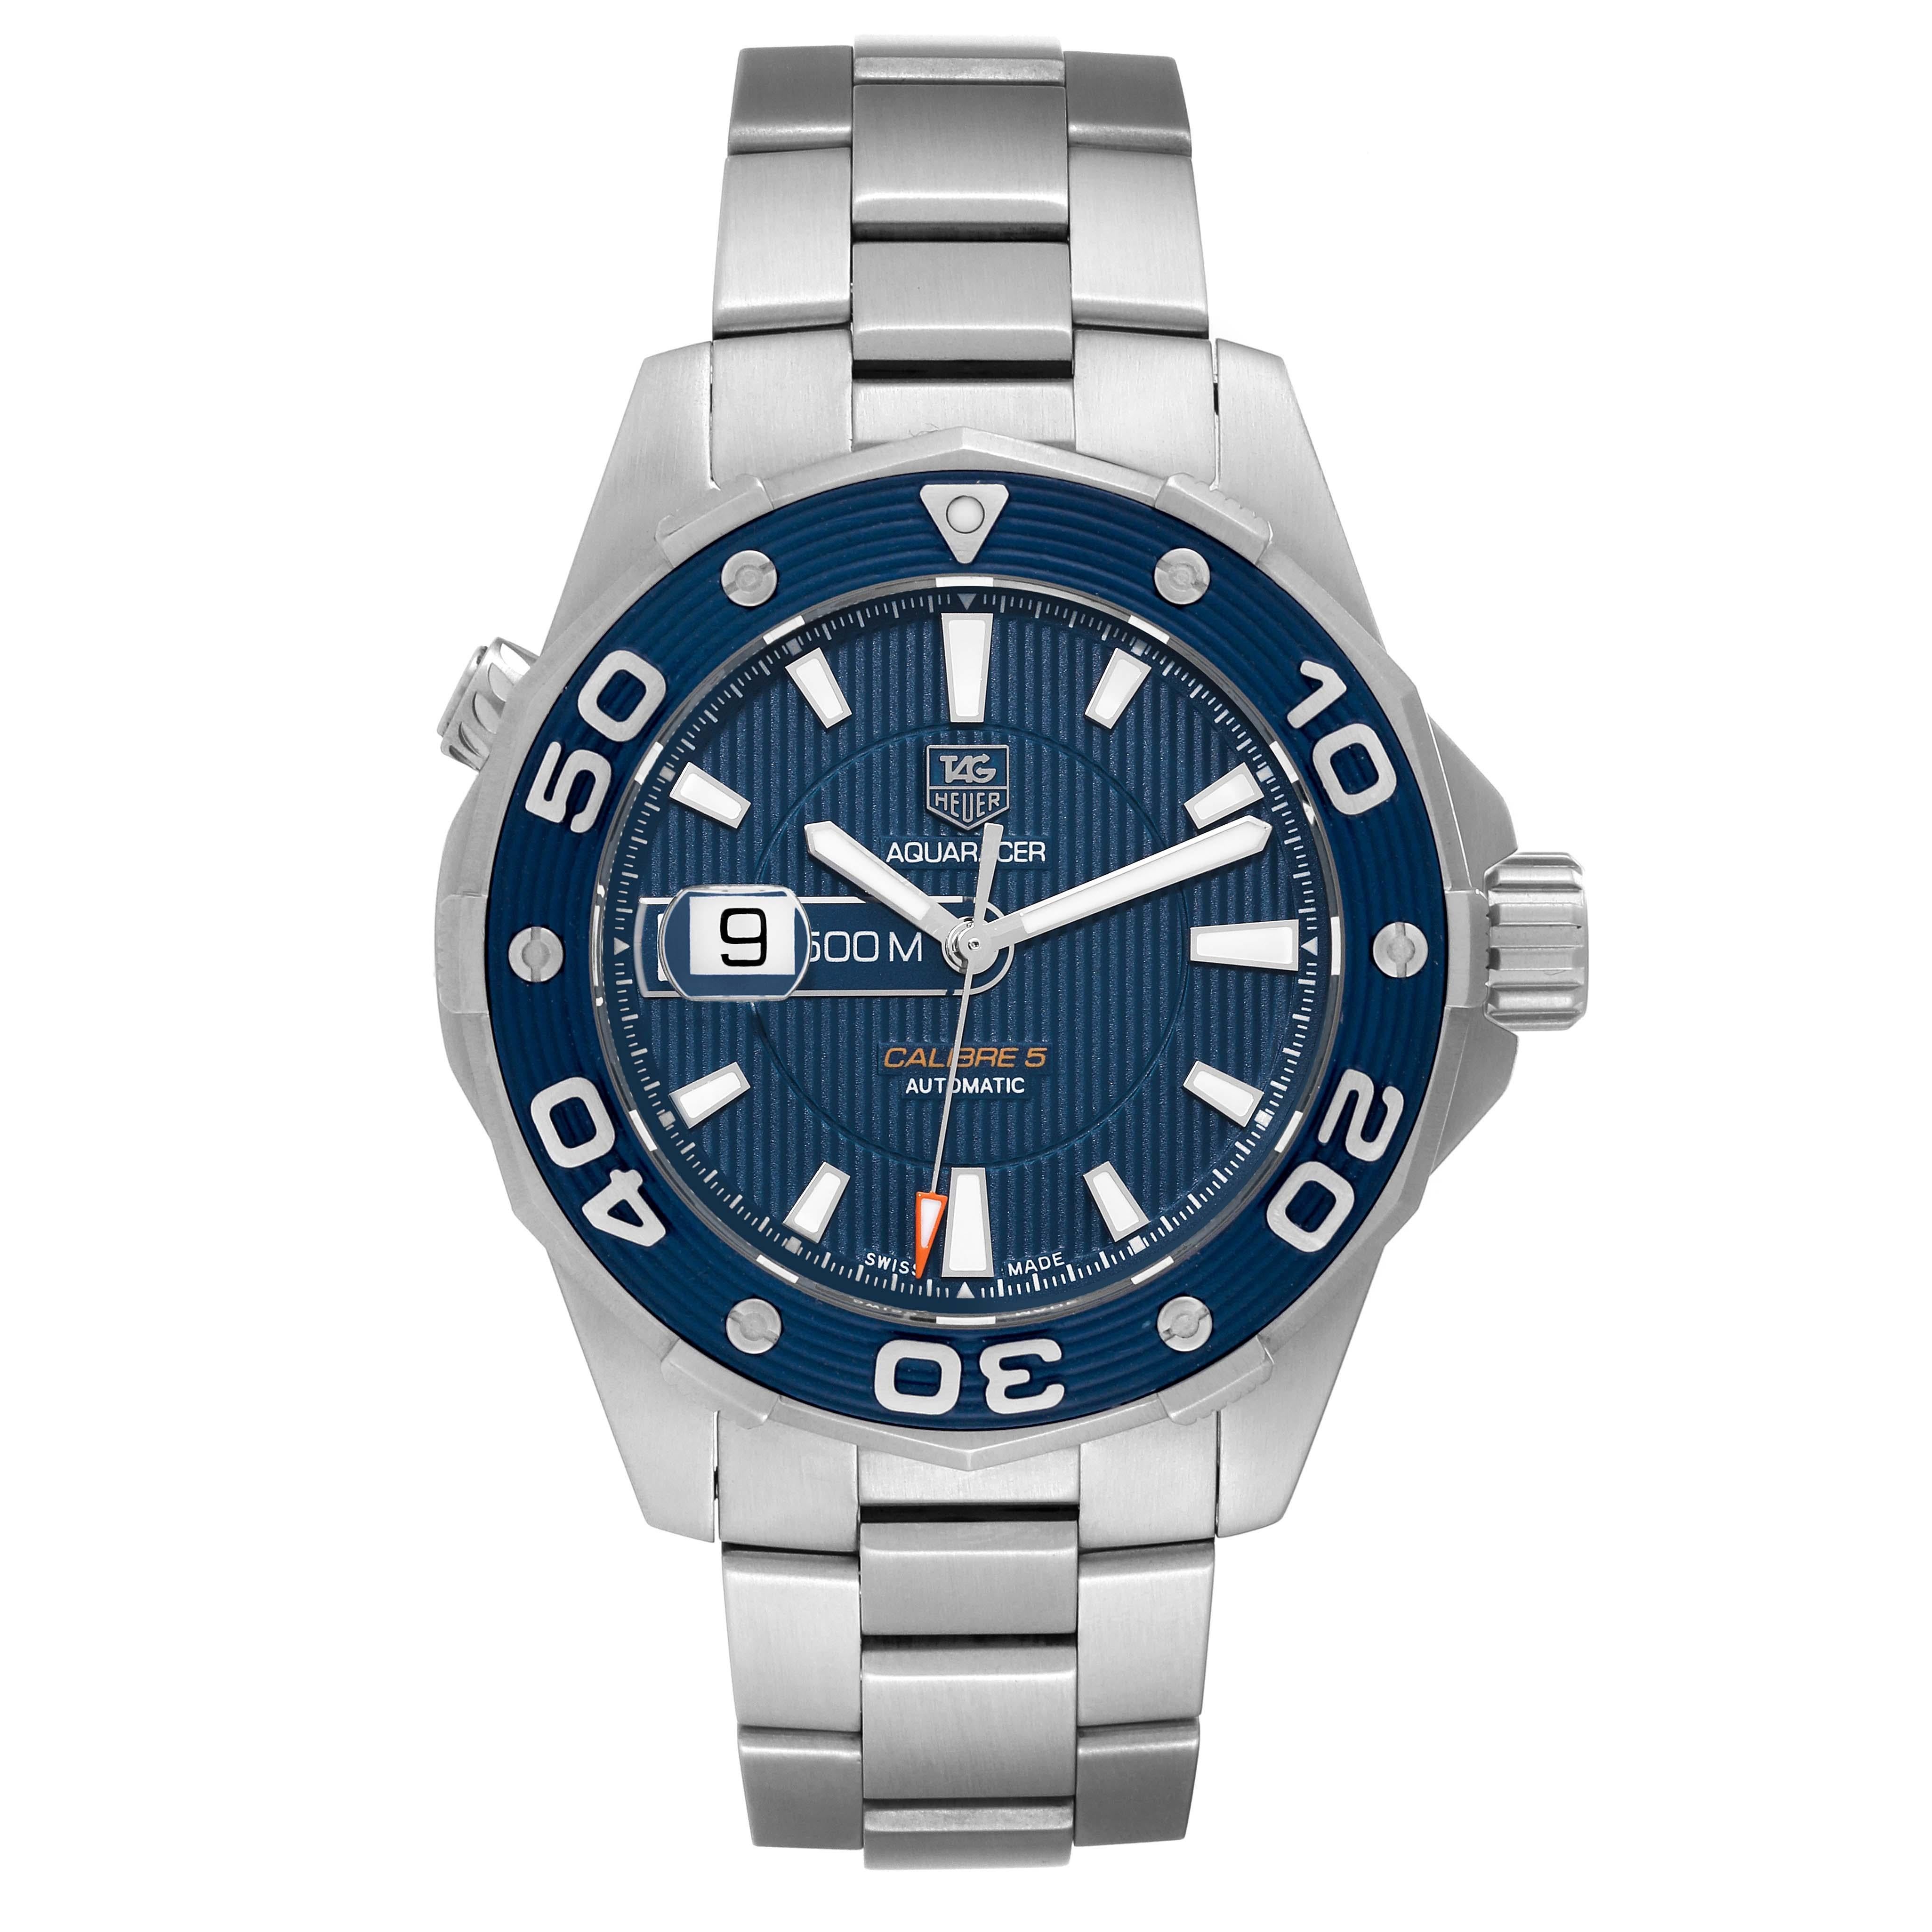 Tag Heuer Aquaracer Blue Dial Steel Mens Watch WAJ2112. Automatic self-winding movement. Stainless steel case 43.0 mm in diameter. Exhibition transparent sapphire crystal caseback. Blue unidirectional rotating bezel. Scratch resistant sapphire